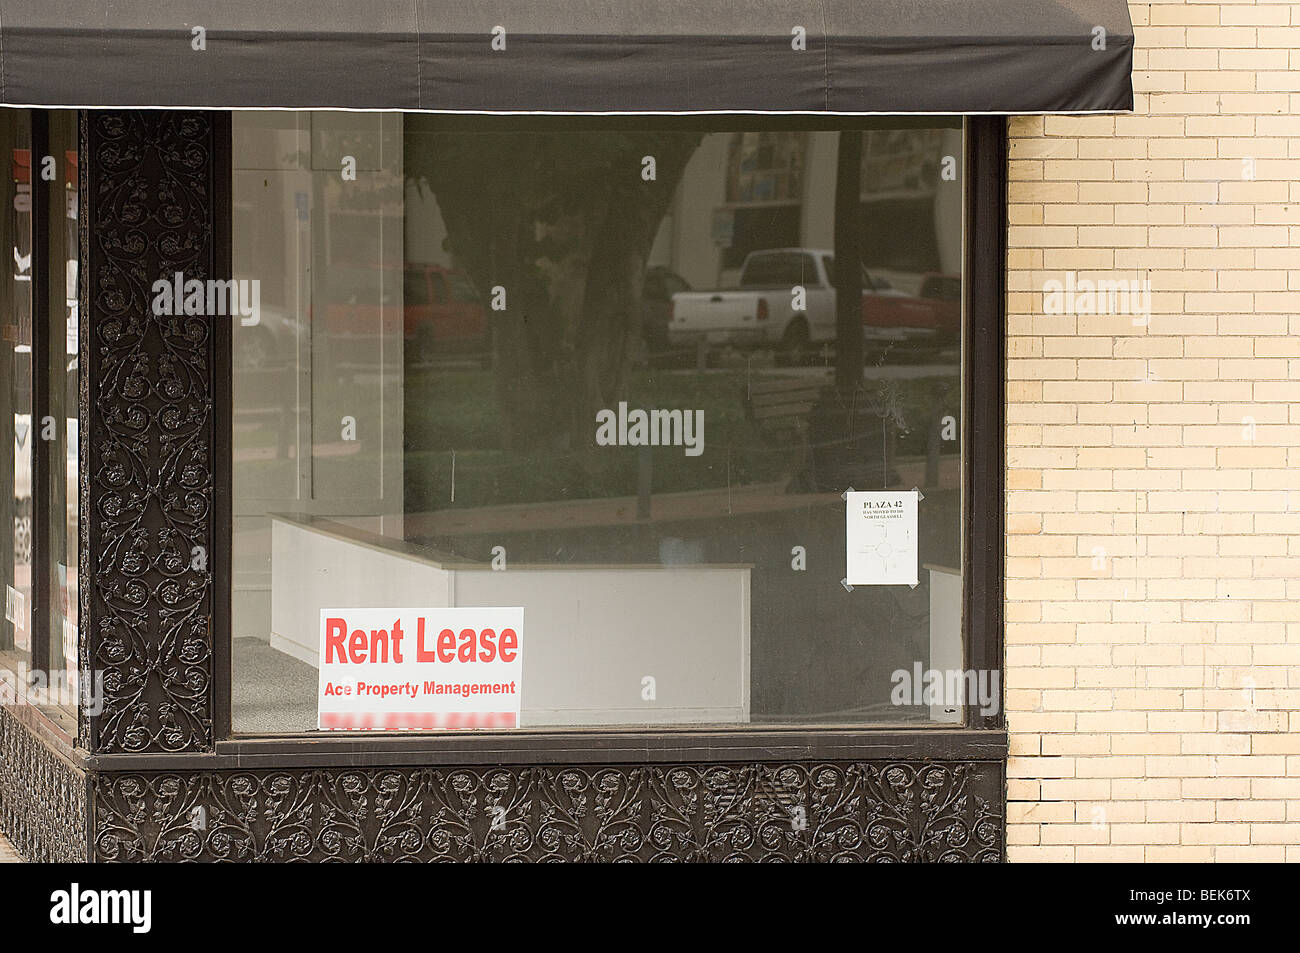 Commercial retail or office space for rent or lease, Real Estate. Stock Photo